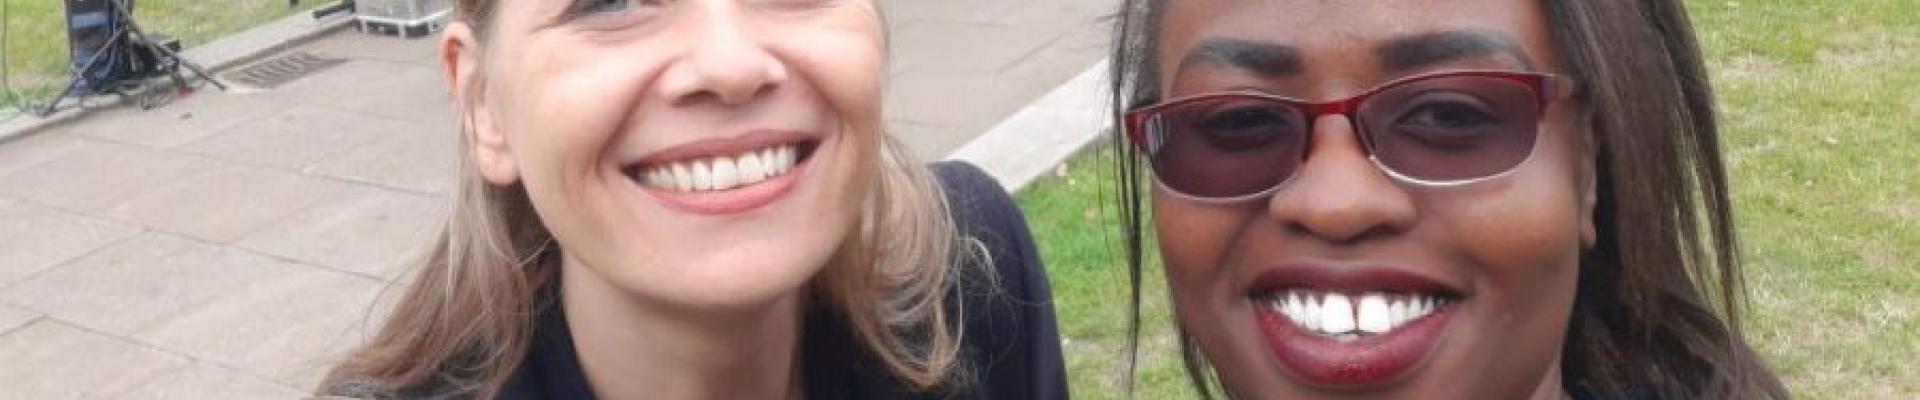 Two women smiling while taking a selfie